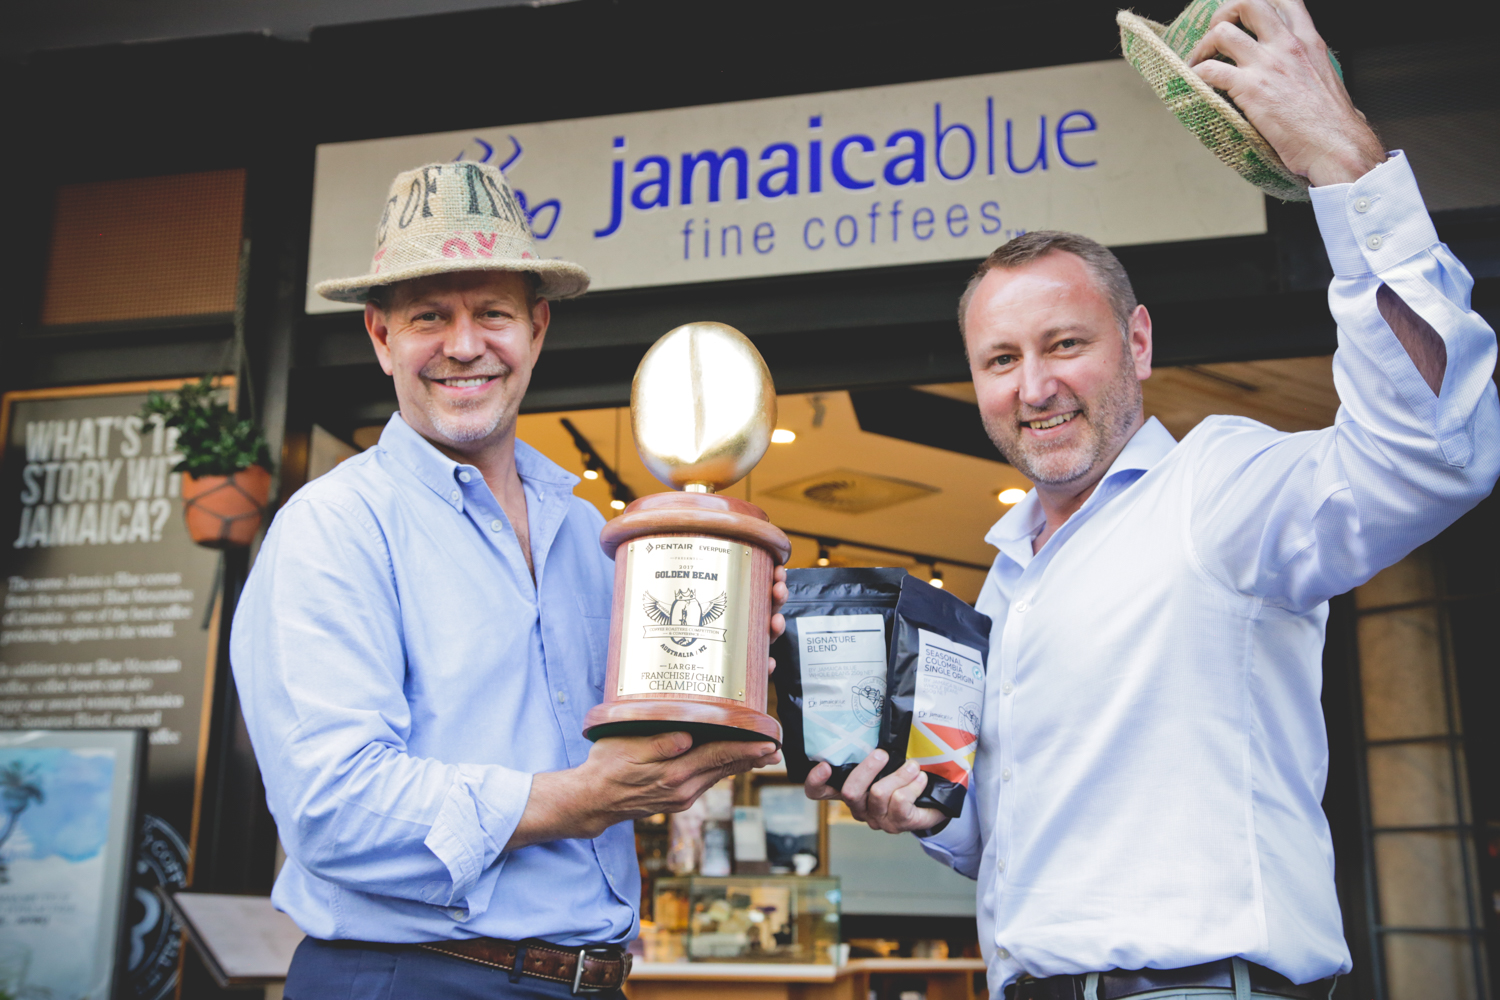 Jamaica Blue Awarded Australia’s Best Franchise Coffee Roaster at World’s Largest Coffee Competition